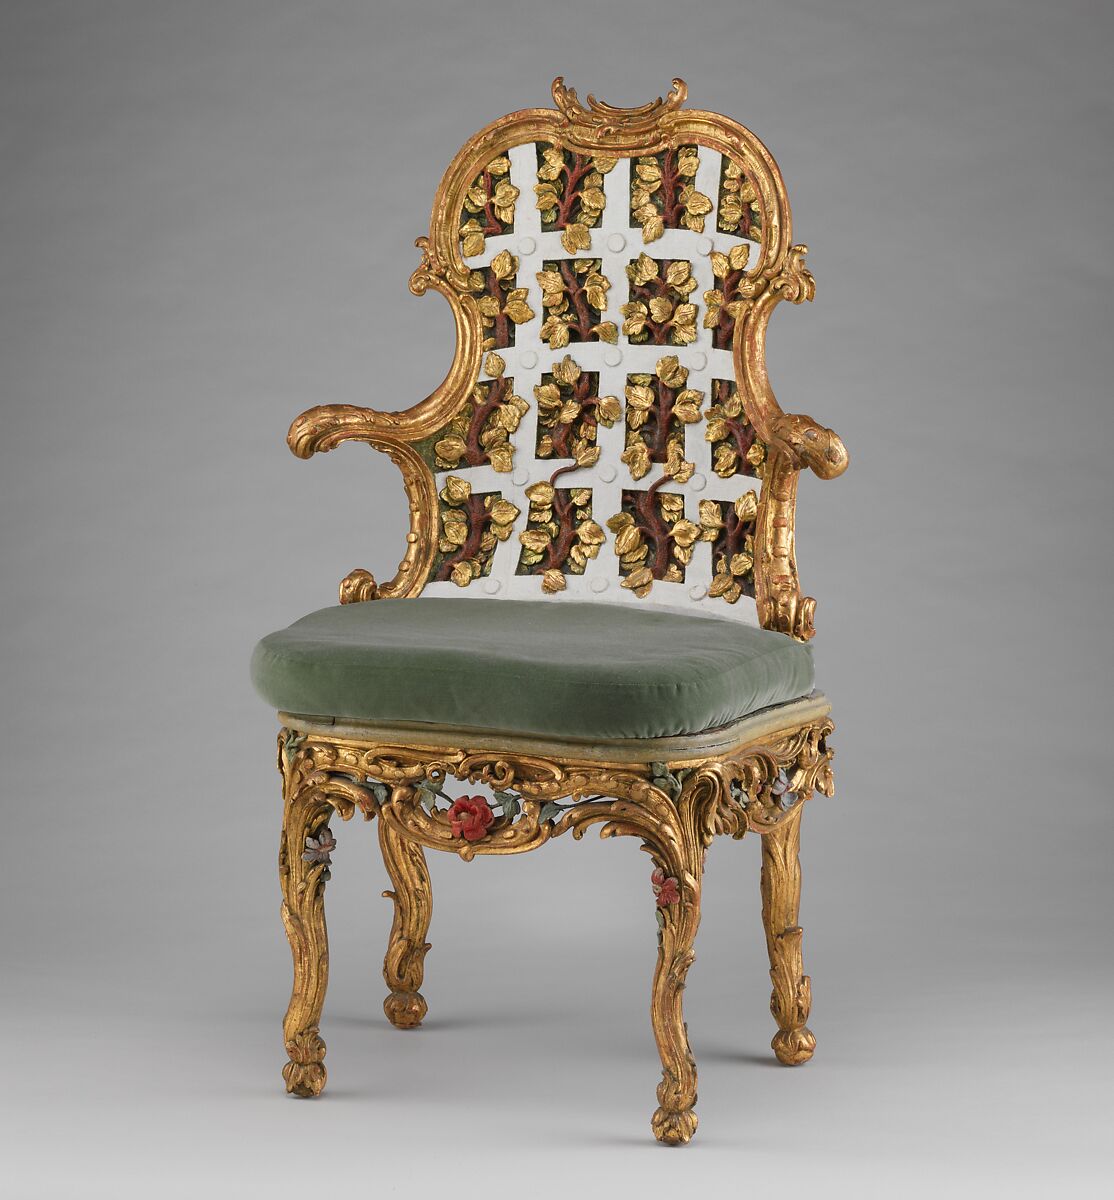 Armchair (one of a pair) (part of a set), Attributed to Johann Michael Bauer (German, Westheim 1710–1779 Bamberg), Carved, painted and gilded limewood; squab pillow in silk velvet (not original), German, Würzburg 